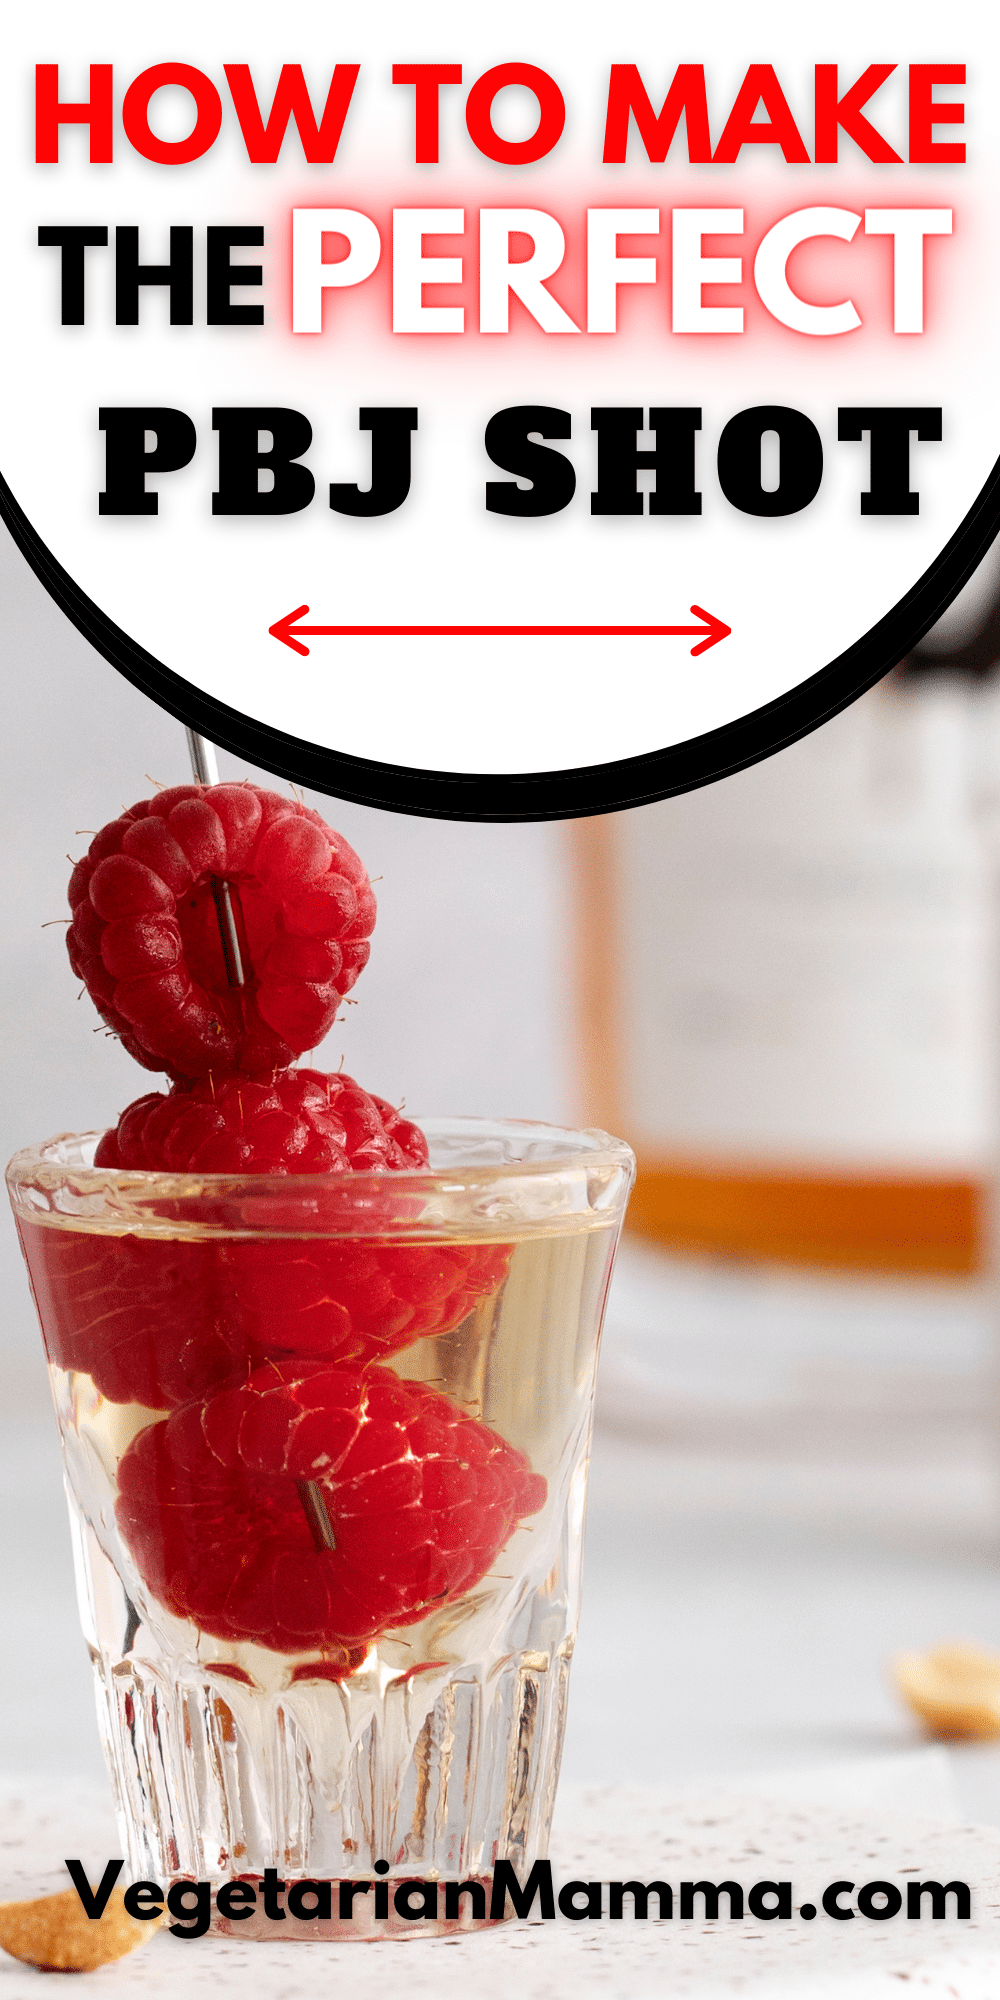 With just two ingredients you can make a delicious PB and Jelly shot that will really get the party started! It's nutty, fruity, and delicious.